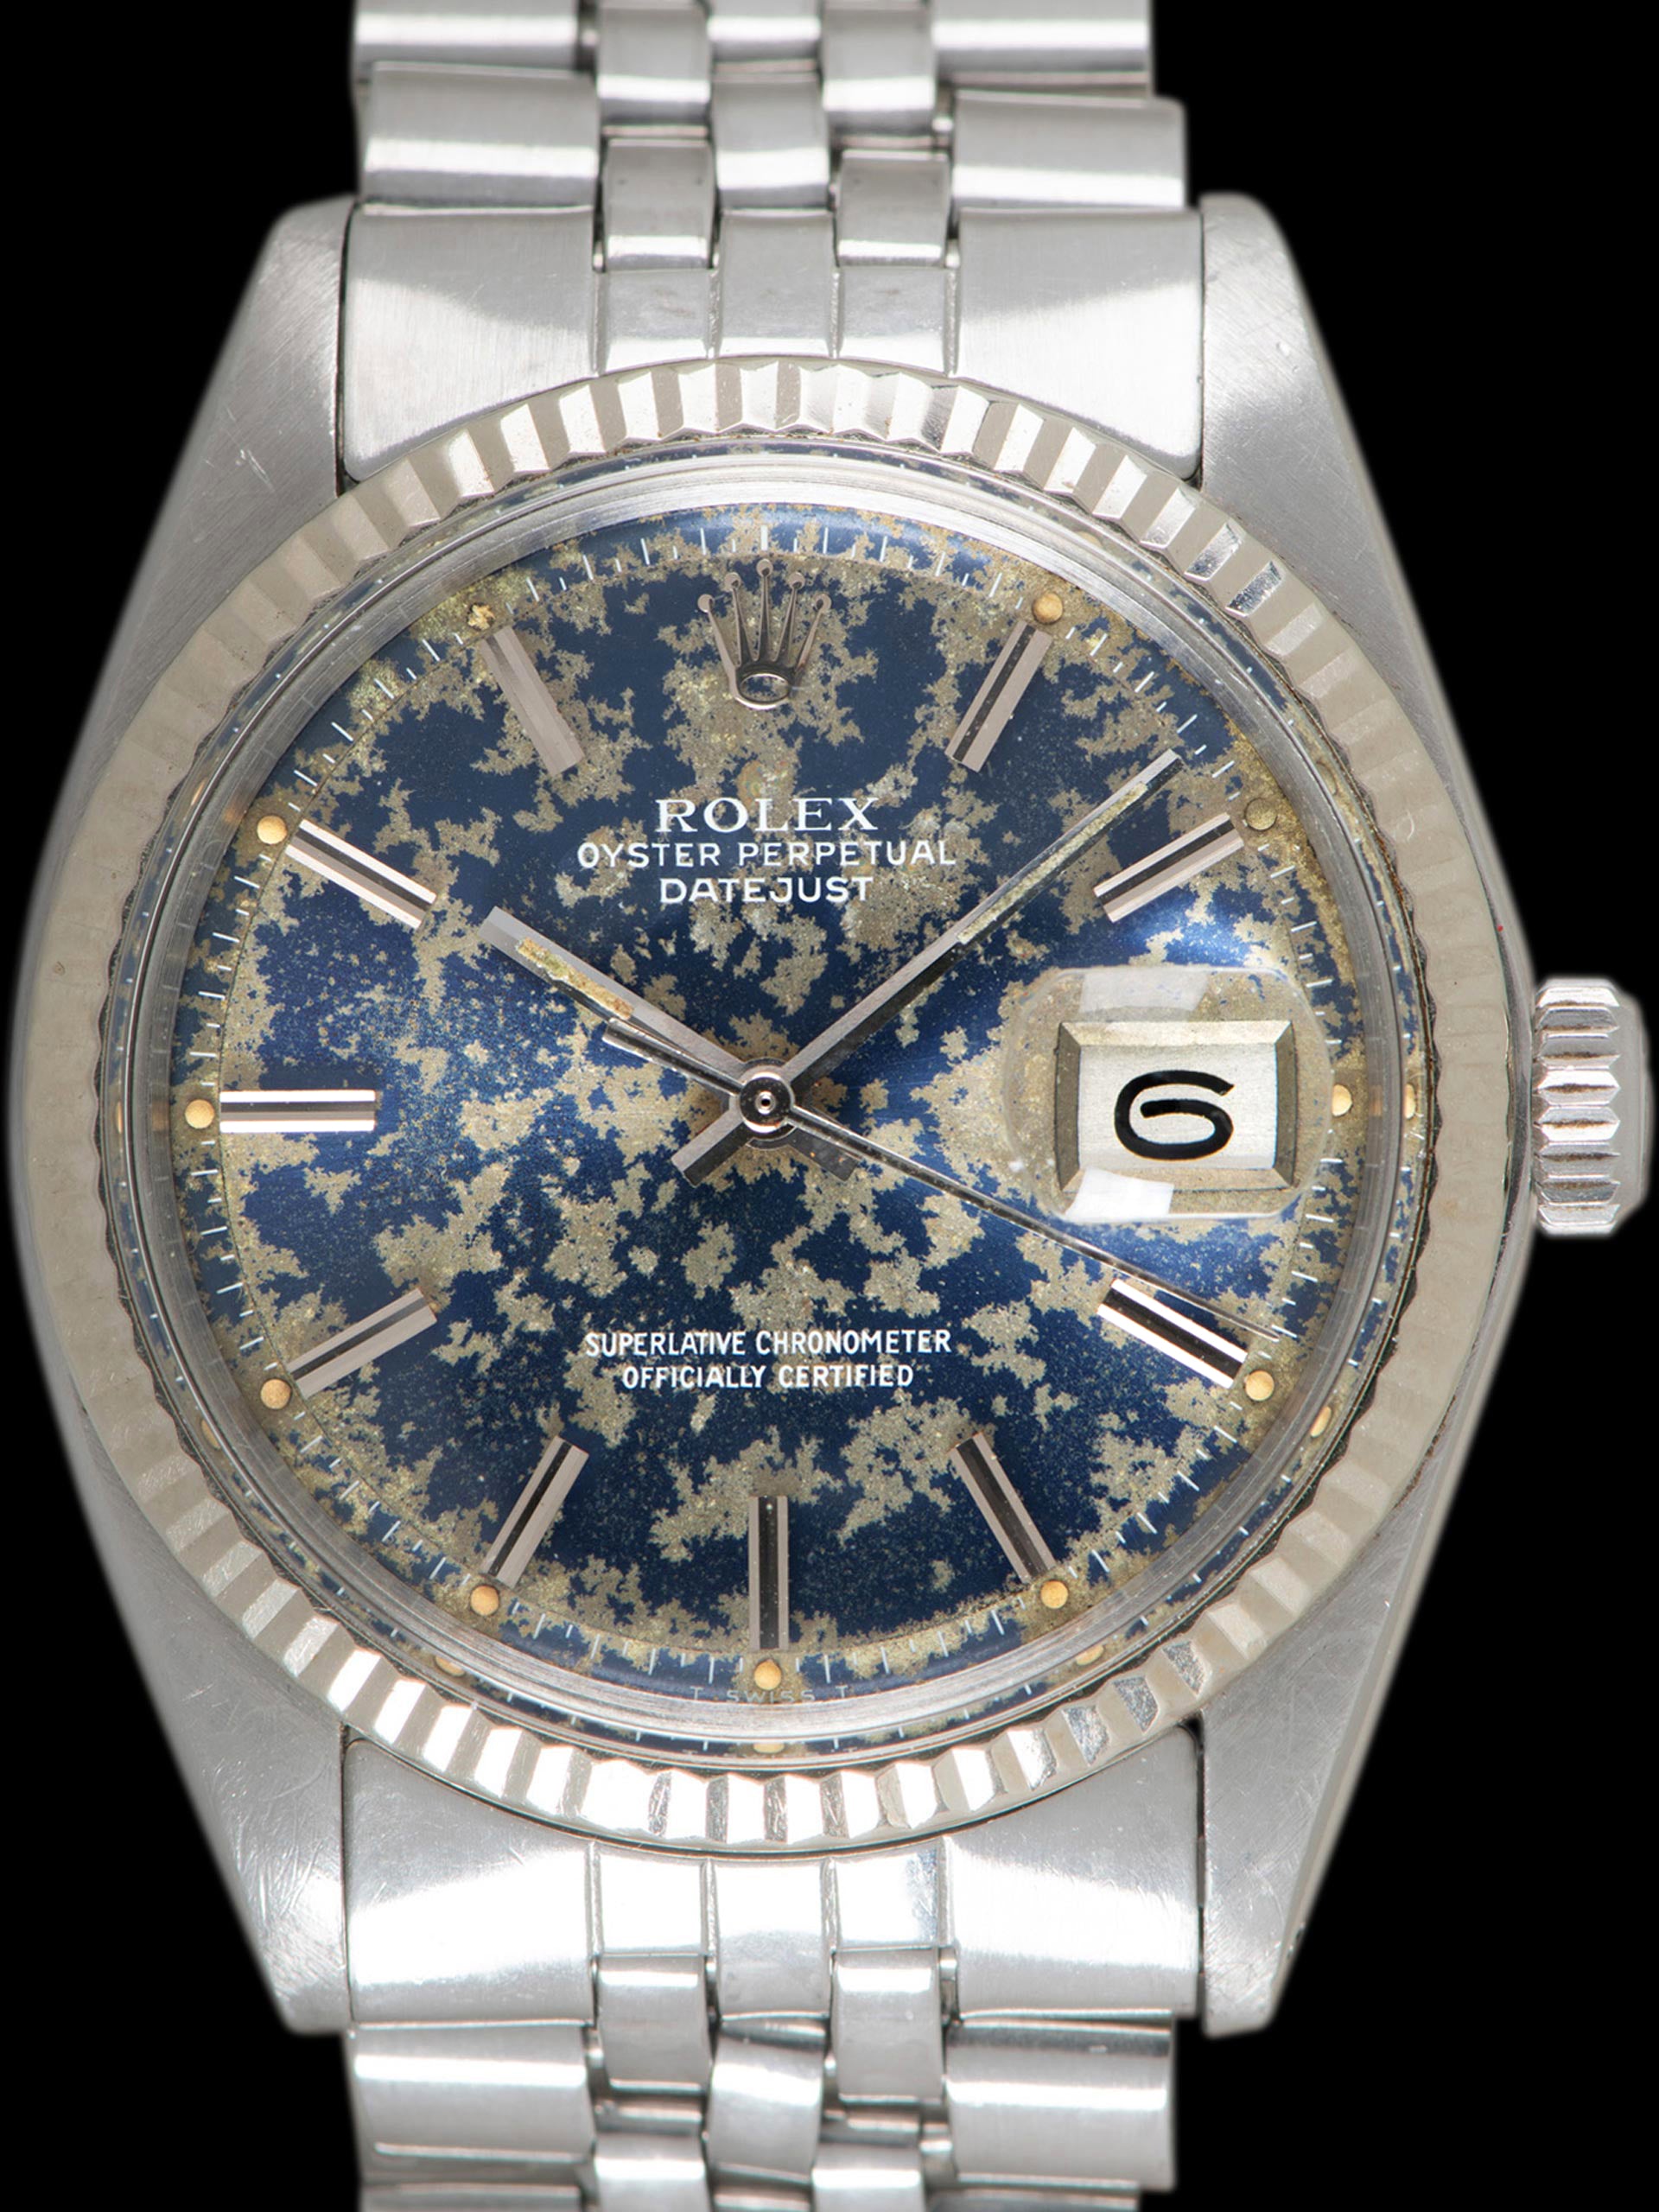 Tropical 1973 Rolex Datejust (Ref. 1601) Blue "Cloudy Day" Dial